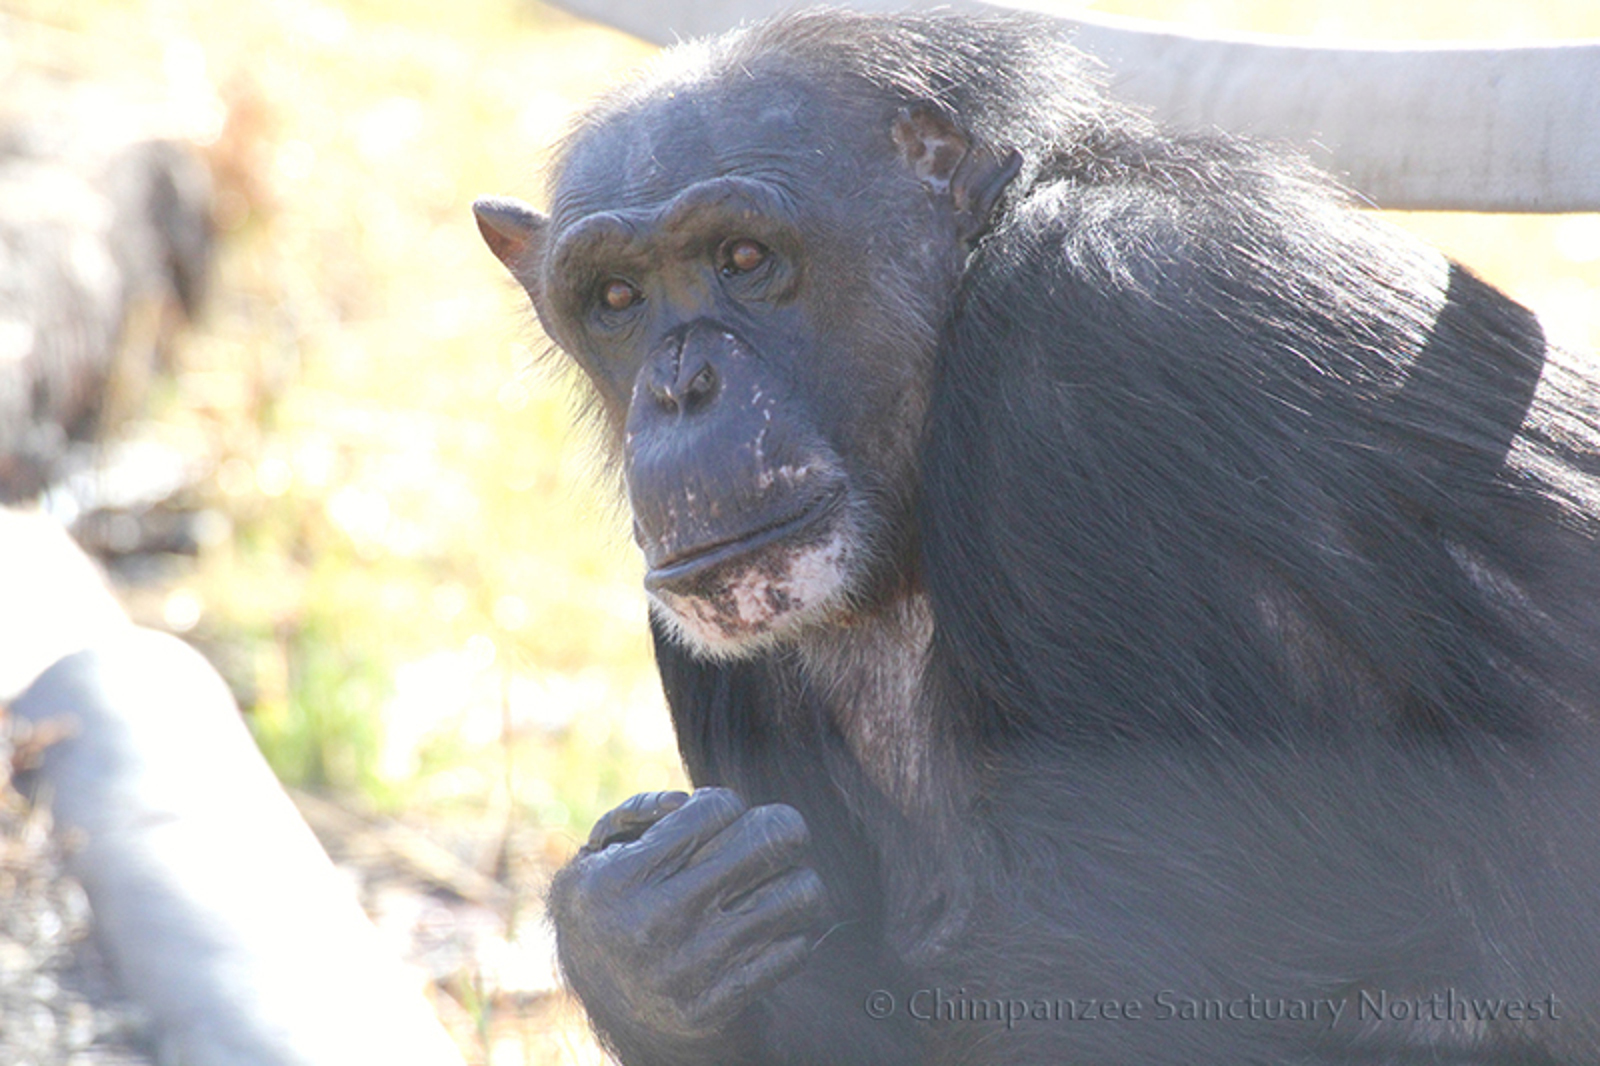 From Unknown to Queen – the Journey of a Special Chimpanzee